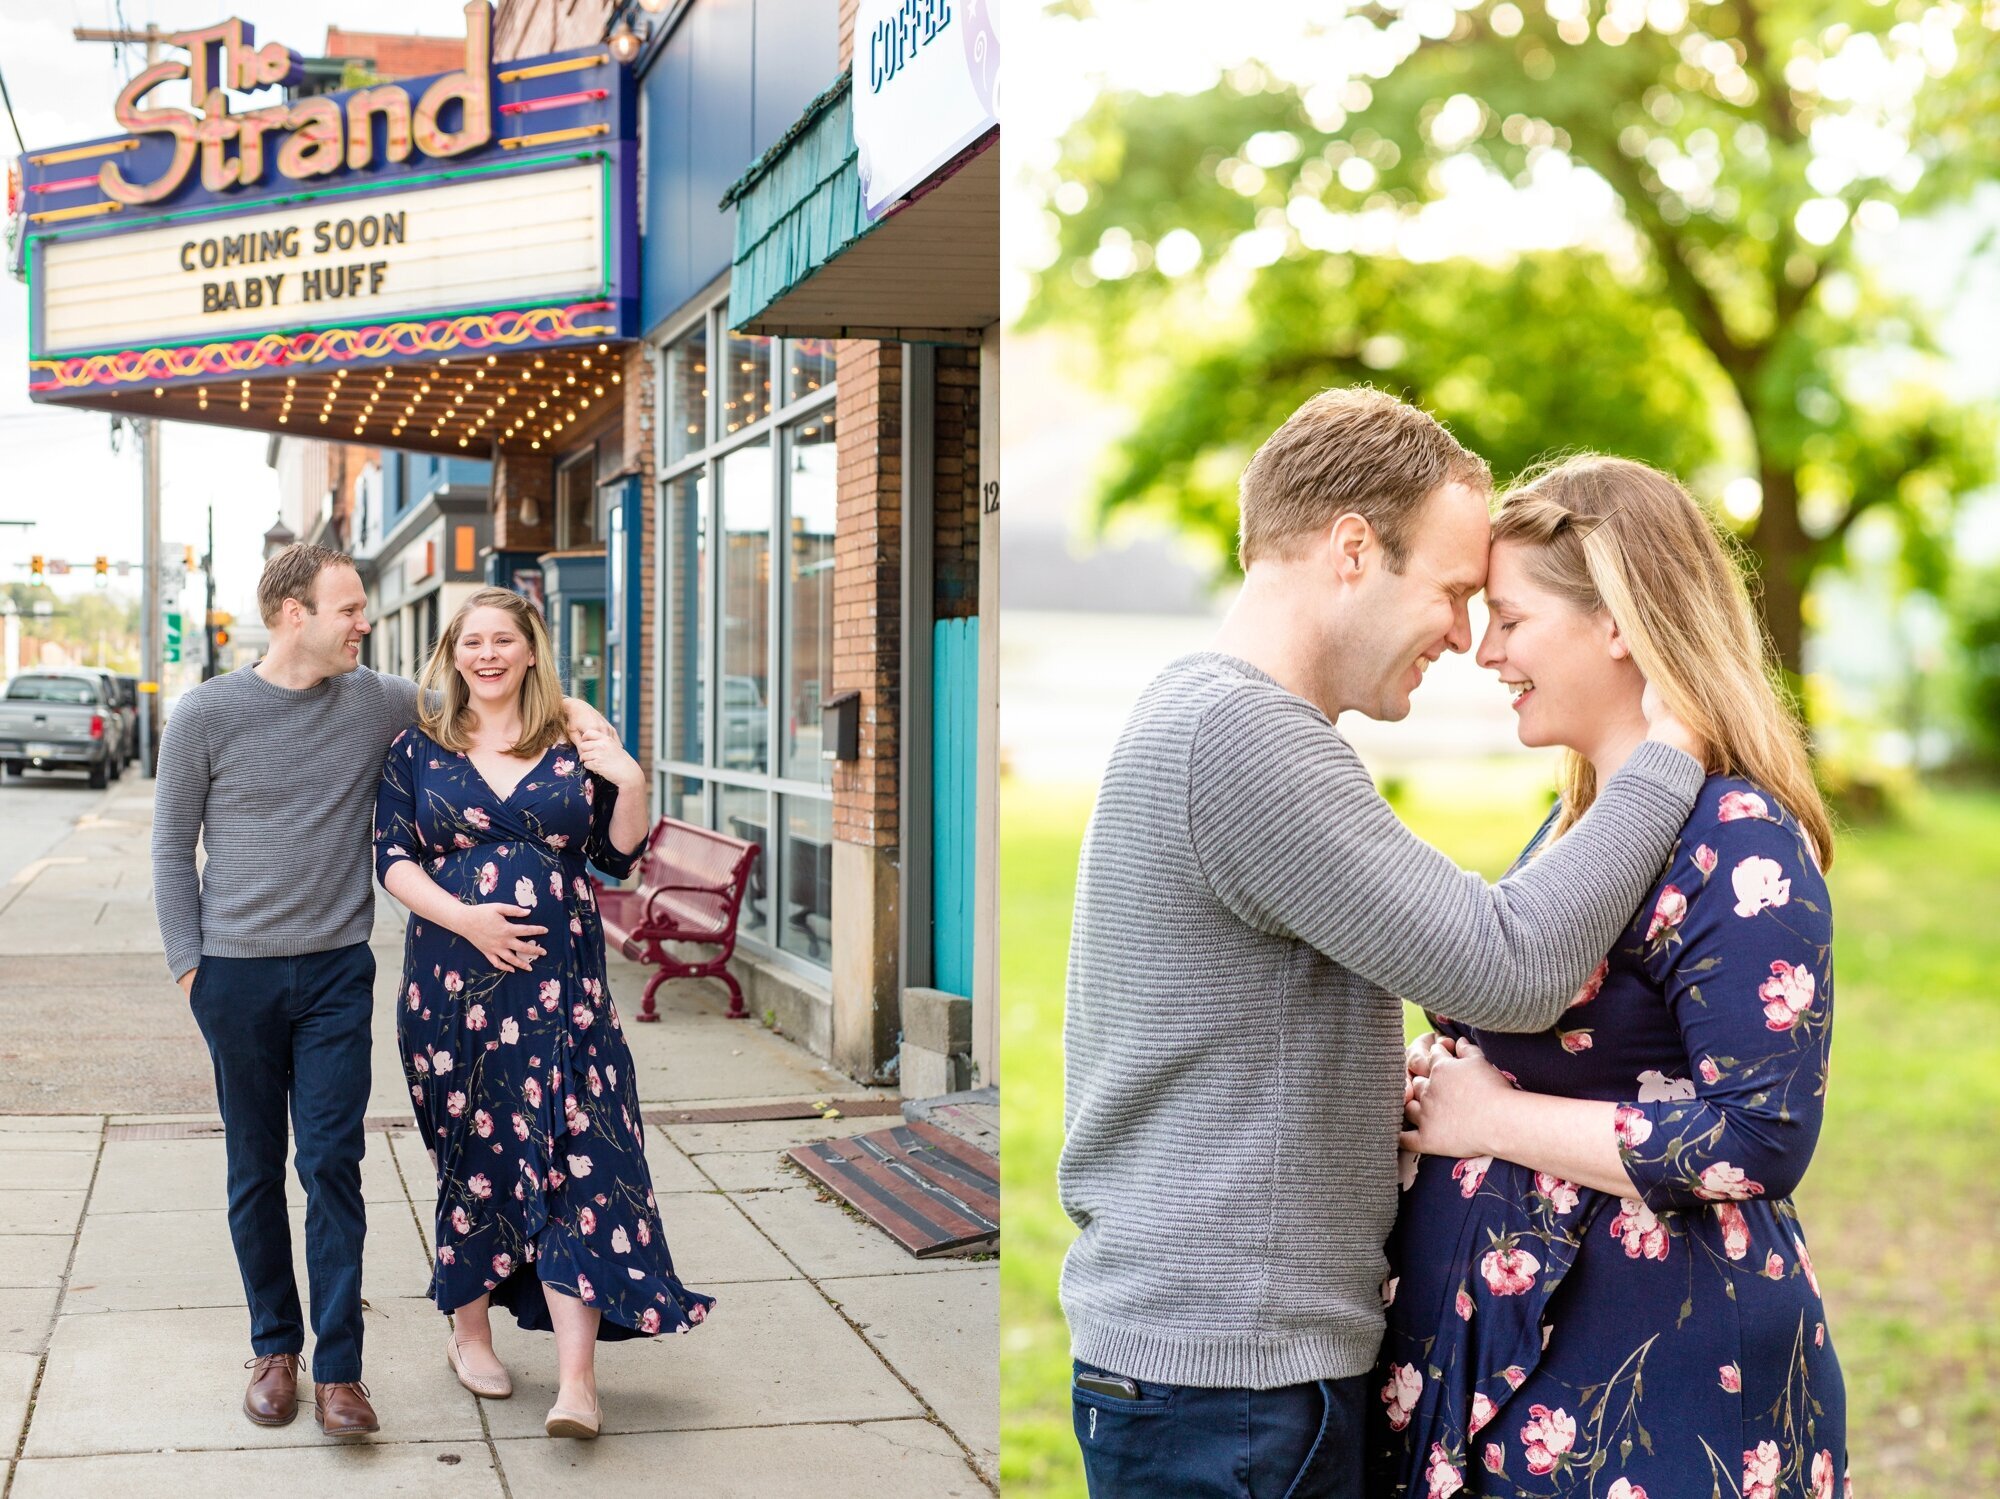 location ideas for photo sessions near cranberry township and zelienople, cranberry township photographer, zelienople photographer, north pittsburgh photographer, zelienople photo shoot